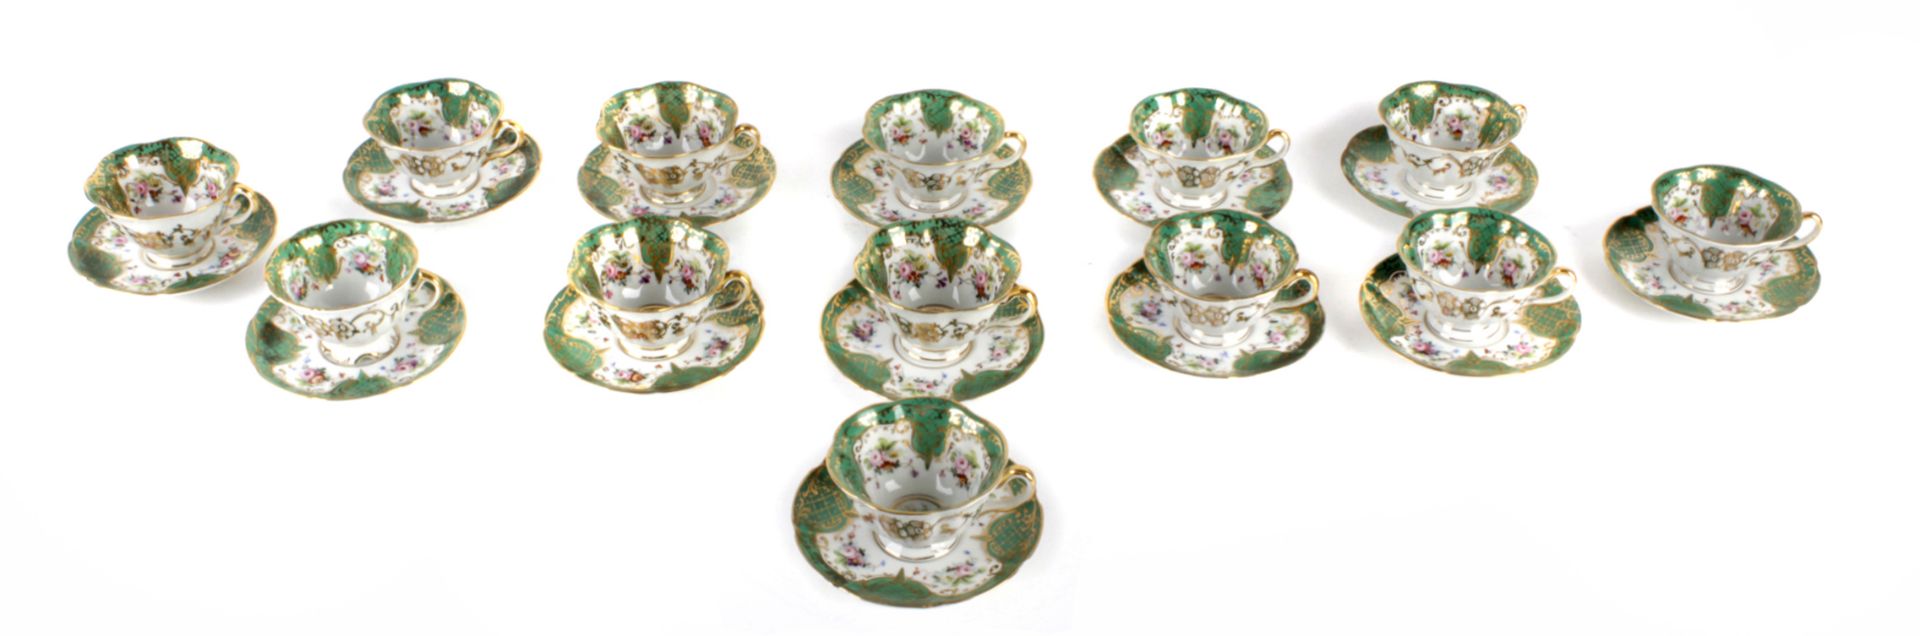 First third of 20th century Portuguese coffee set for 12 pax. in Vistalegre porcelain